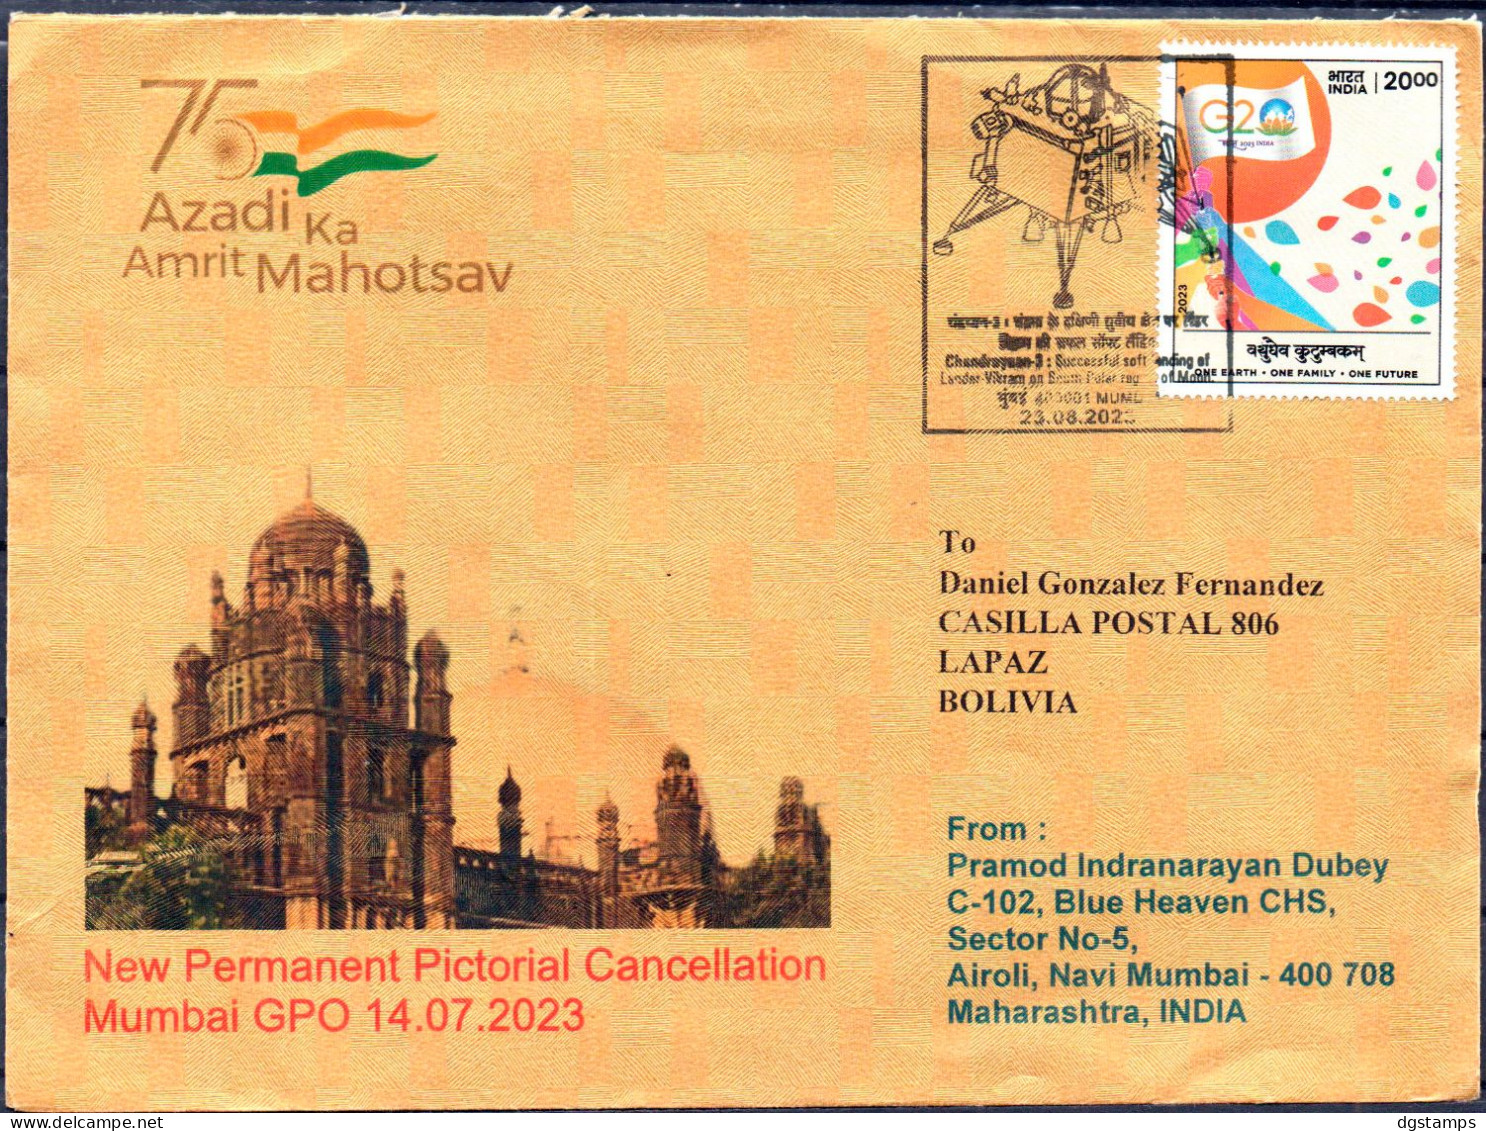 INDIA 2023 Chandrayaan-3, Official Postmark Lunar Mission, Lander Vikram. Indian Space Research Organization - Asia